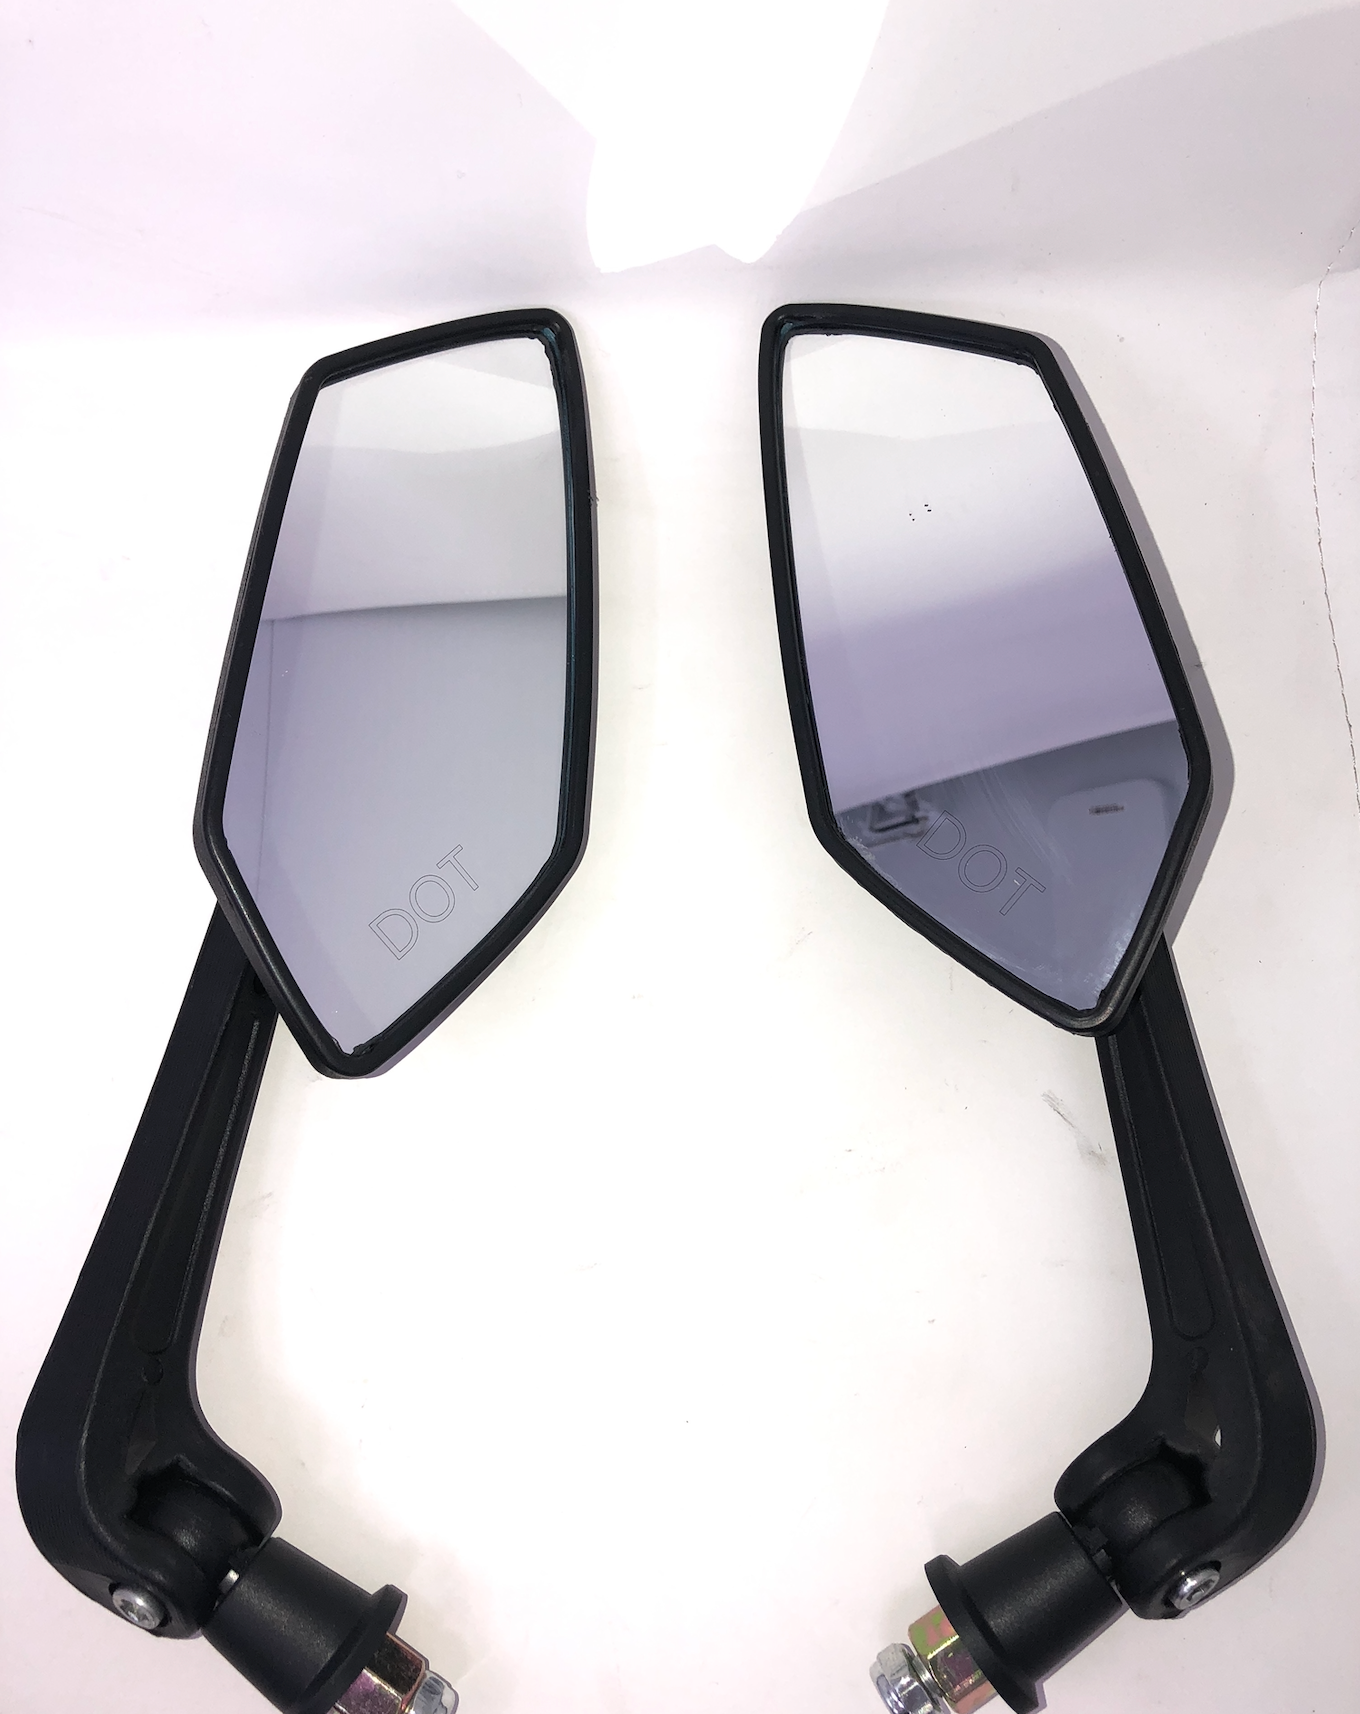 Part # 09060021 mirrors for DF50SST. Venom X18 50cc mirrors for sale 09060021 mirrors